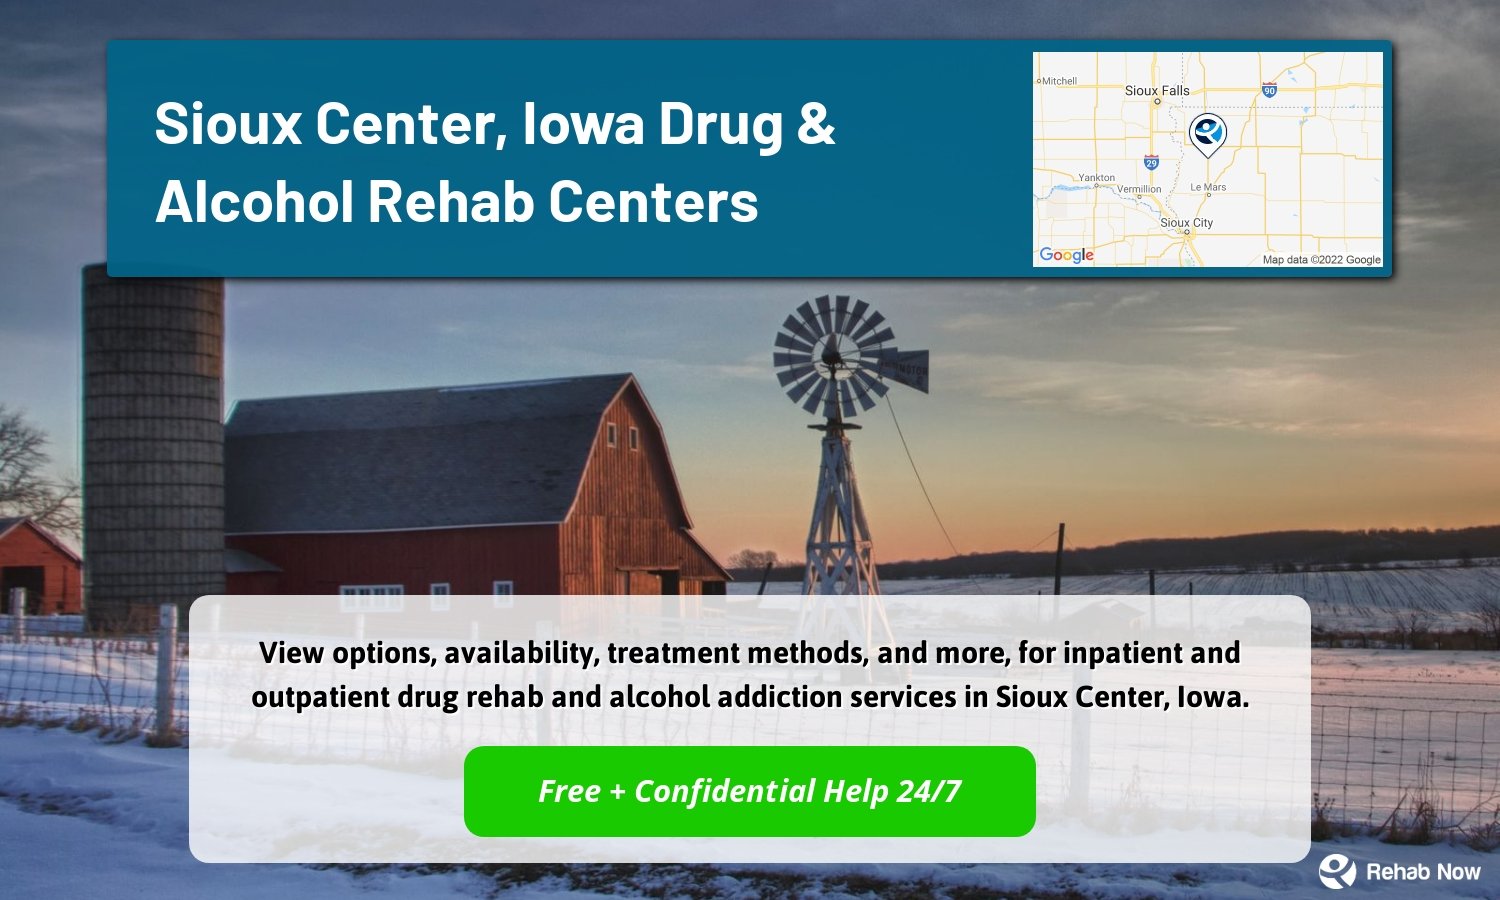 View options, availability, treatment methods, and more, for inpatient and outpatient drug rehab and alcohol addiction services in Sioux Center, Iowa.